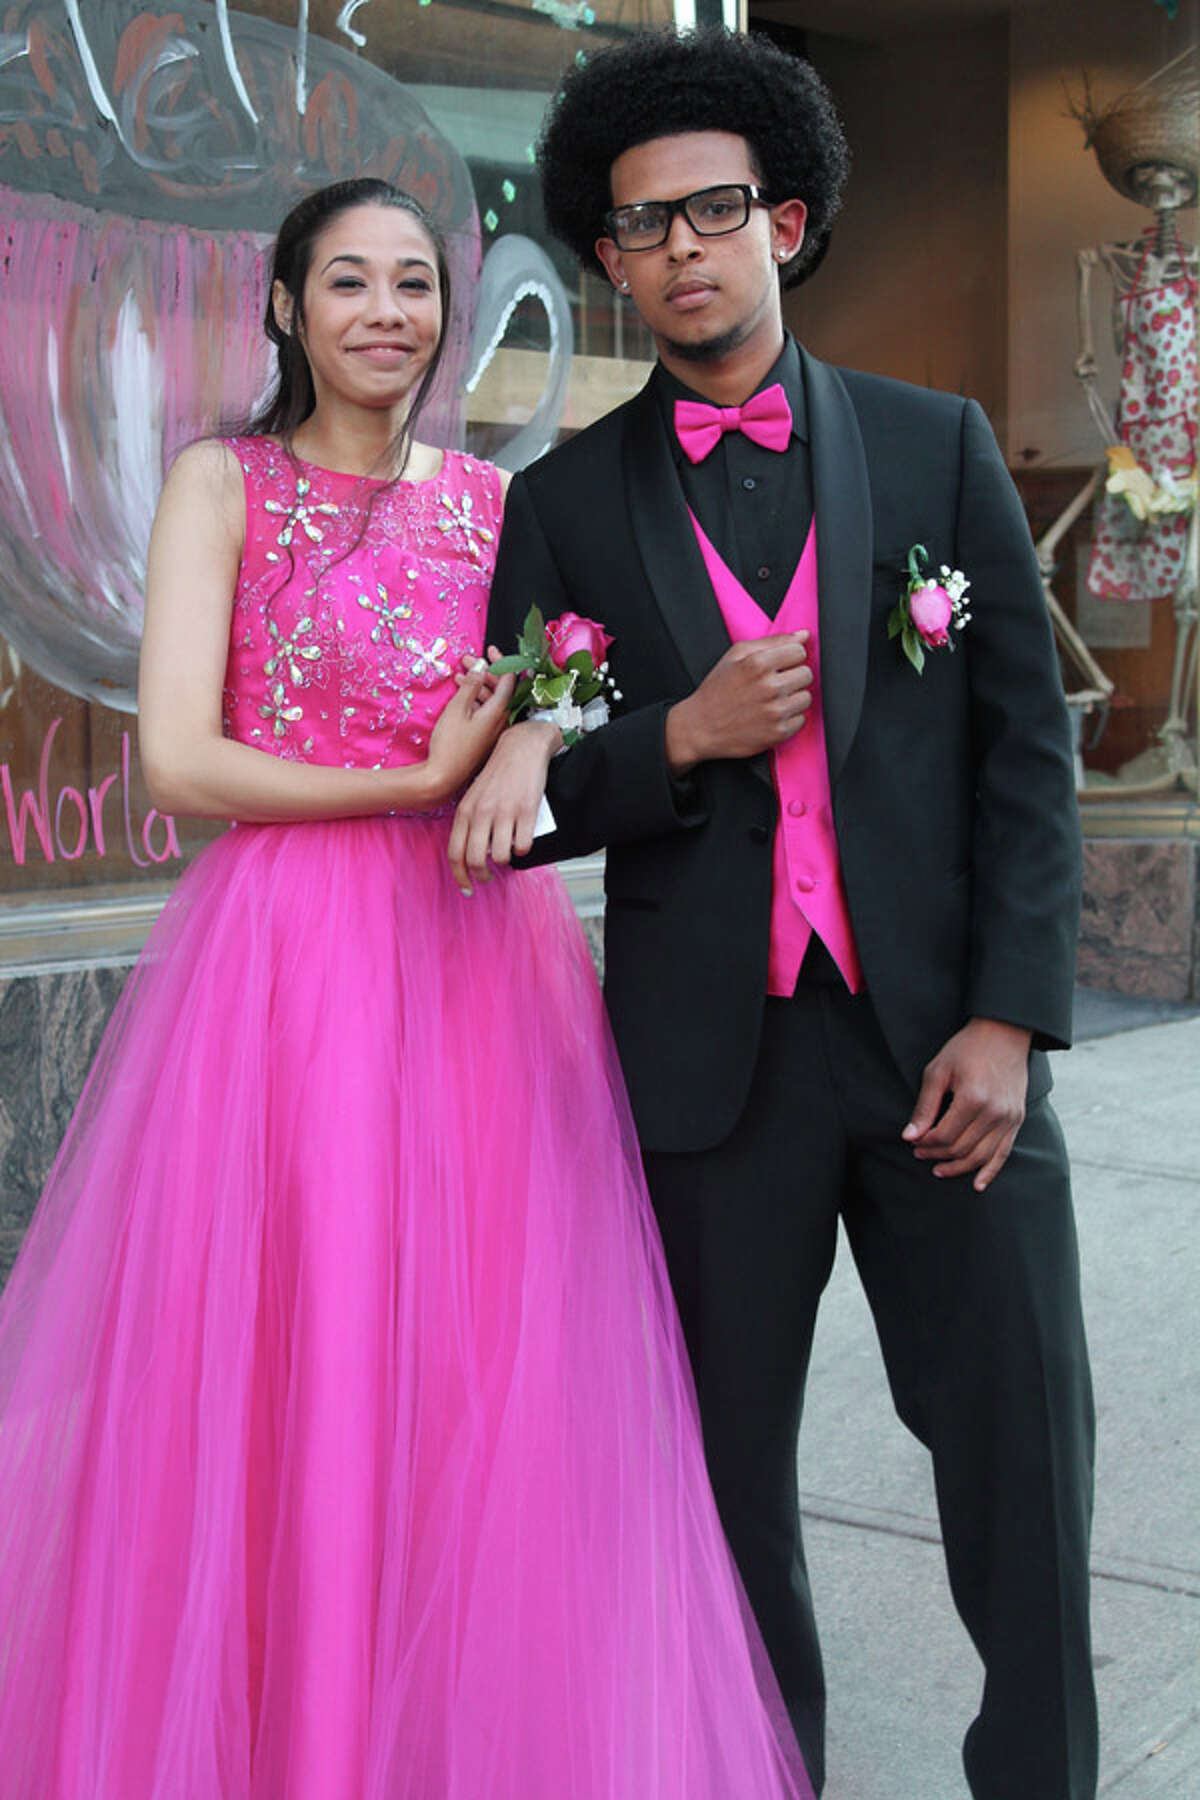 Were you Seen at Albany High School's Senior Prom held at 90 State Street in Albany on Saturday, June 6, 2015?